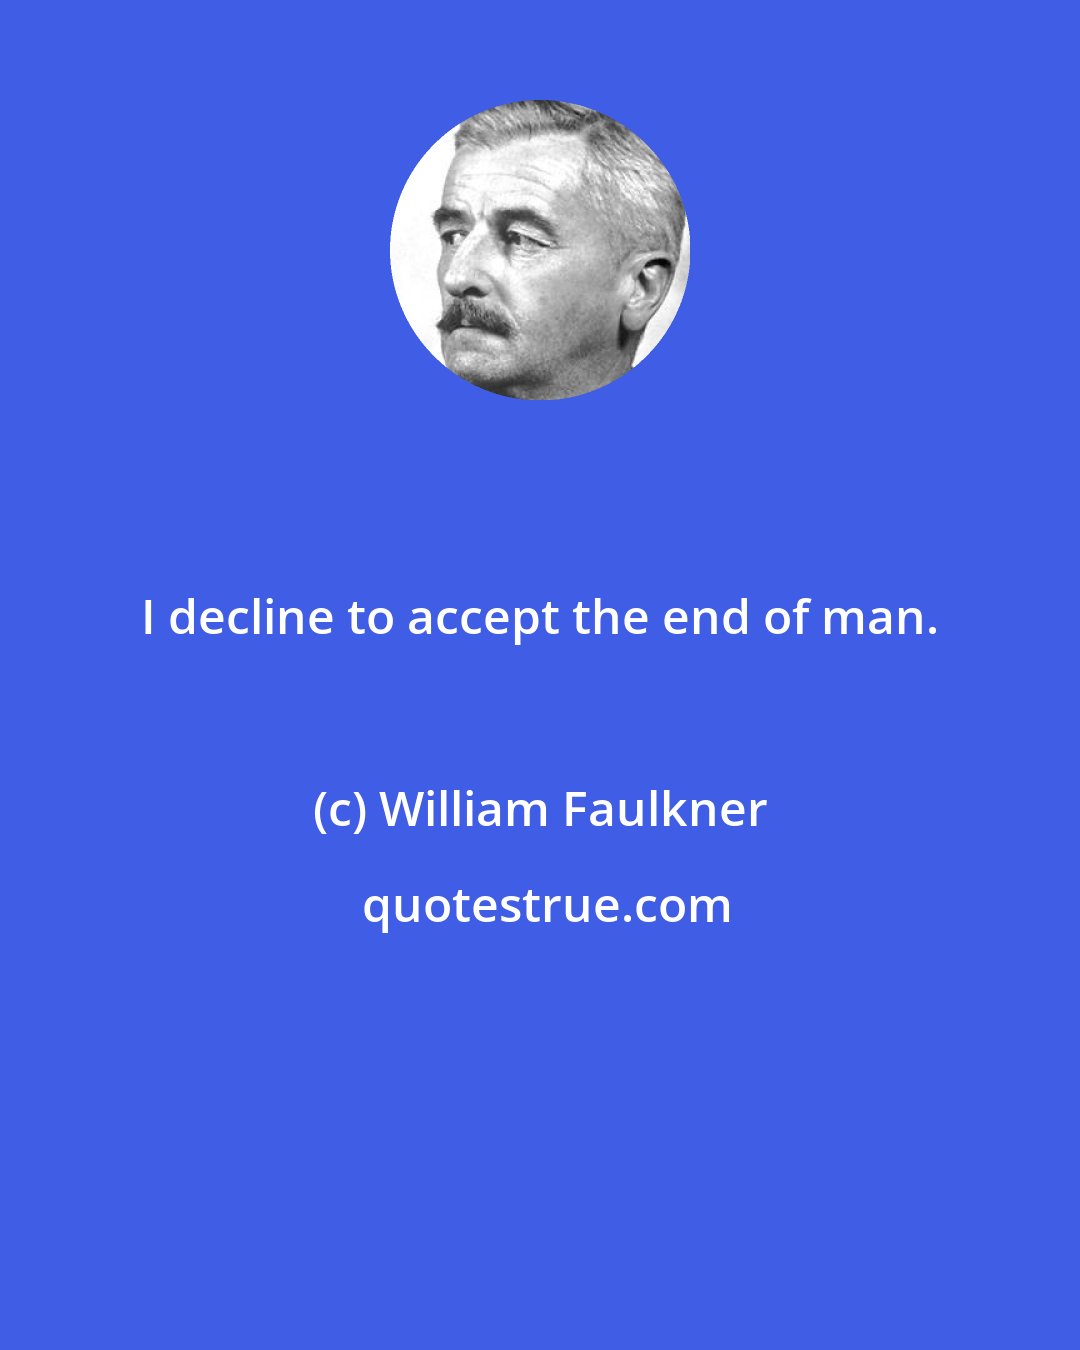 William Faulkner: I decline to accept the end of man.